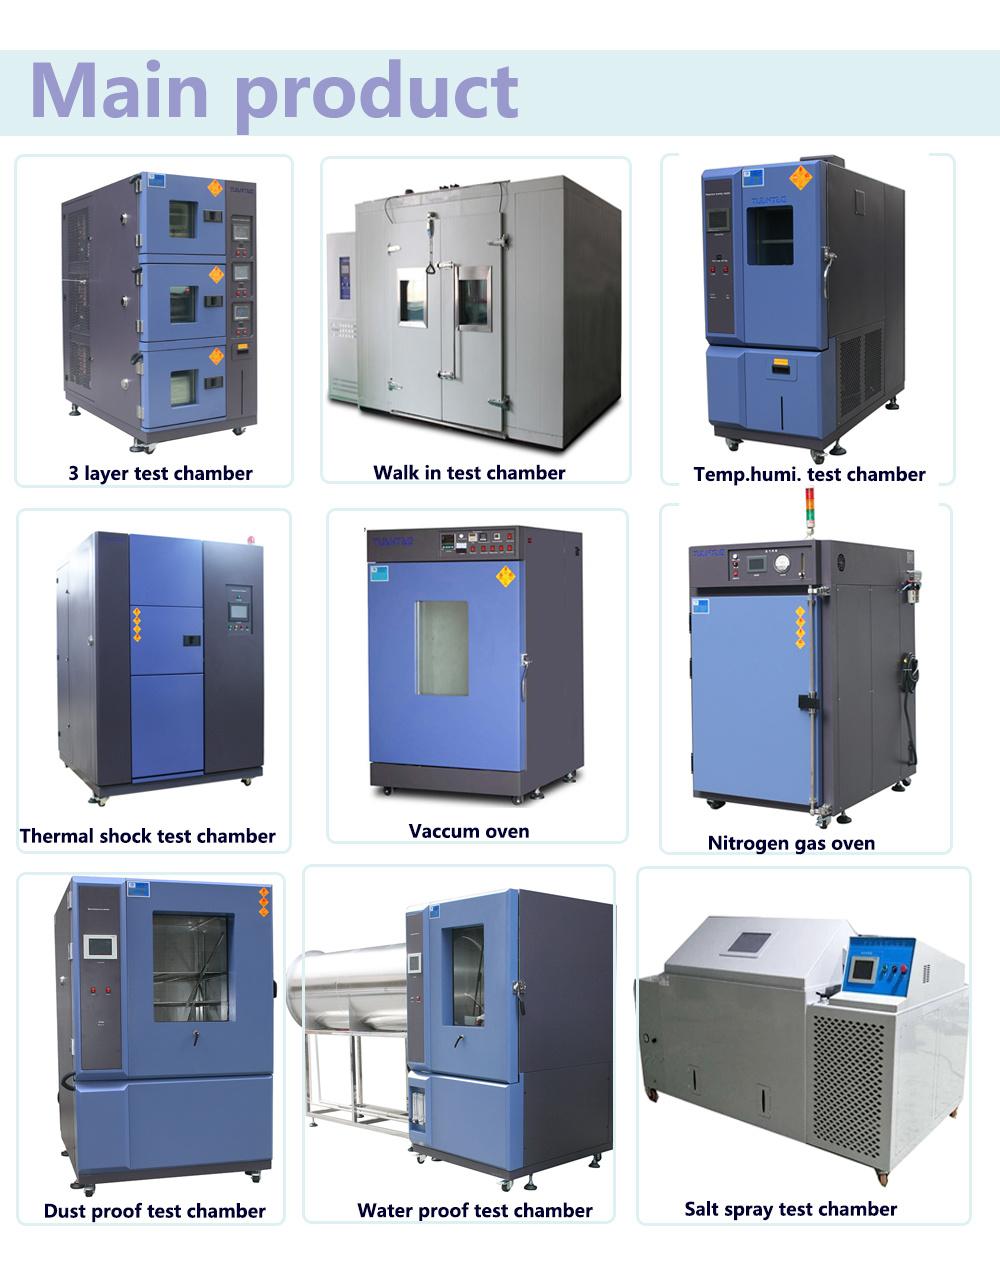 Dust Proof Test Chamber for Test Electrical and Electronic Products